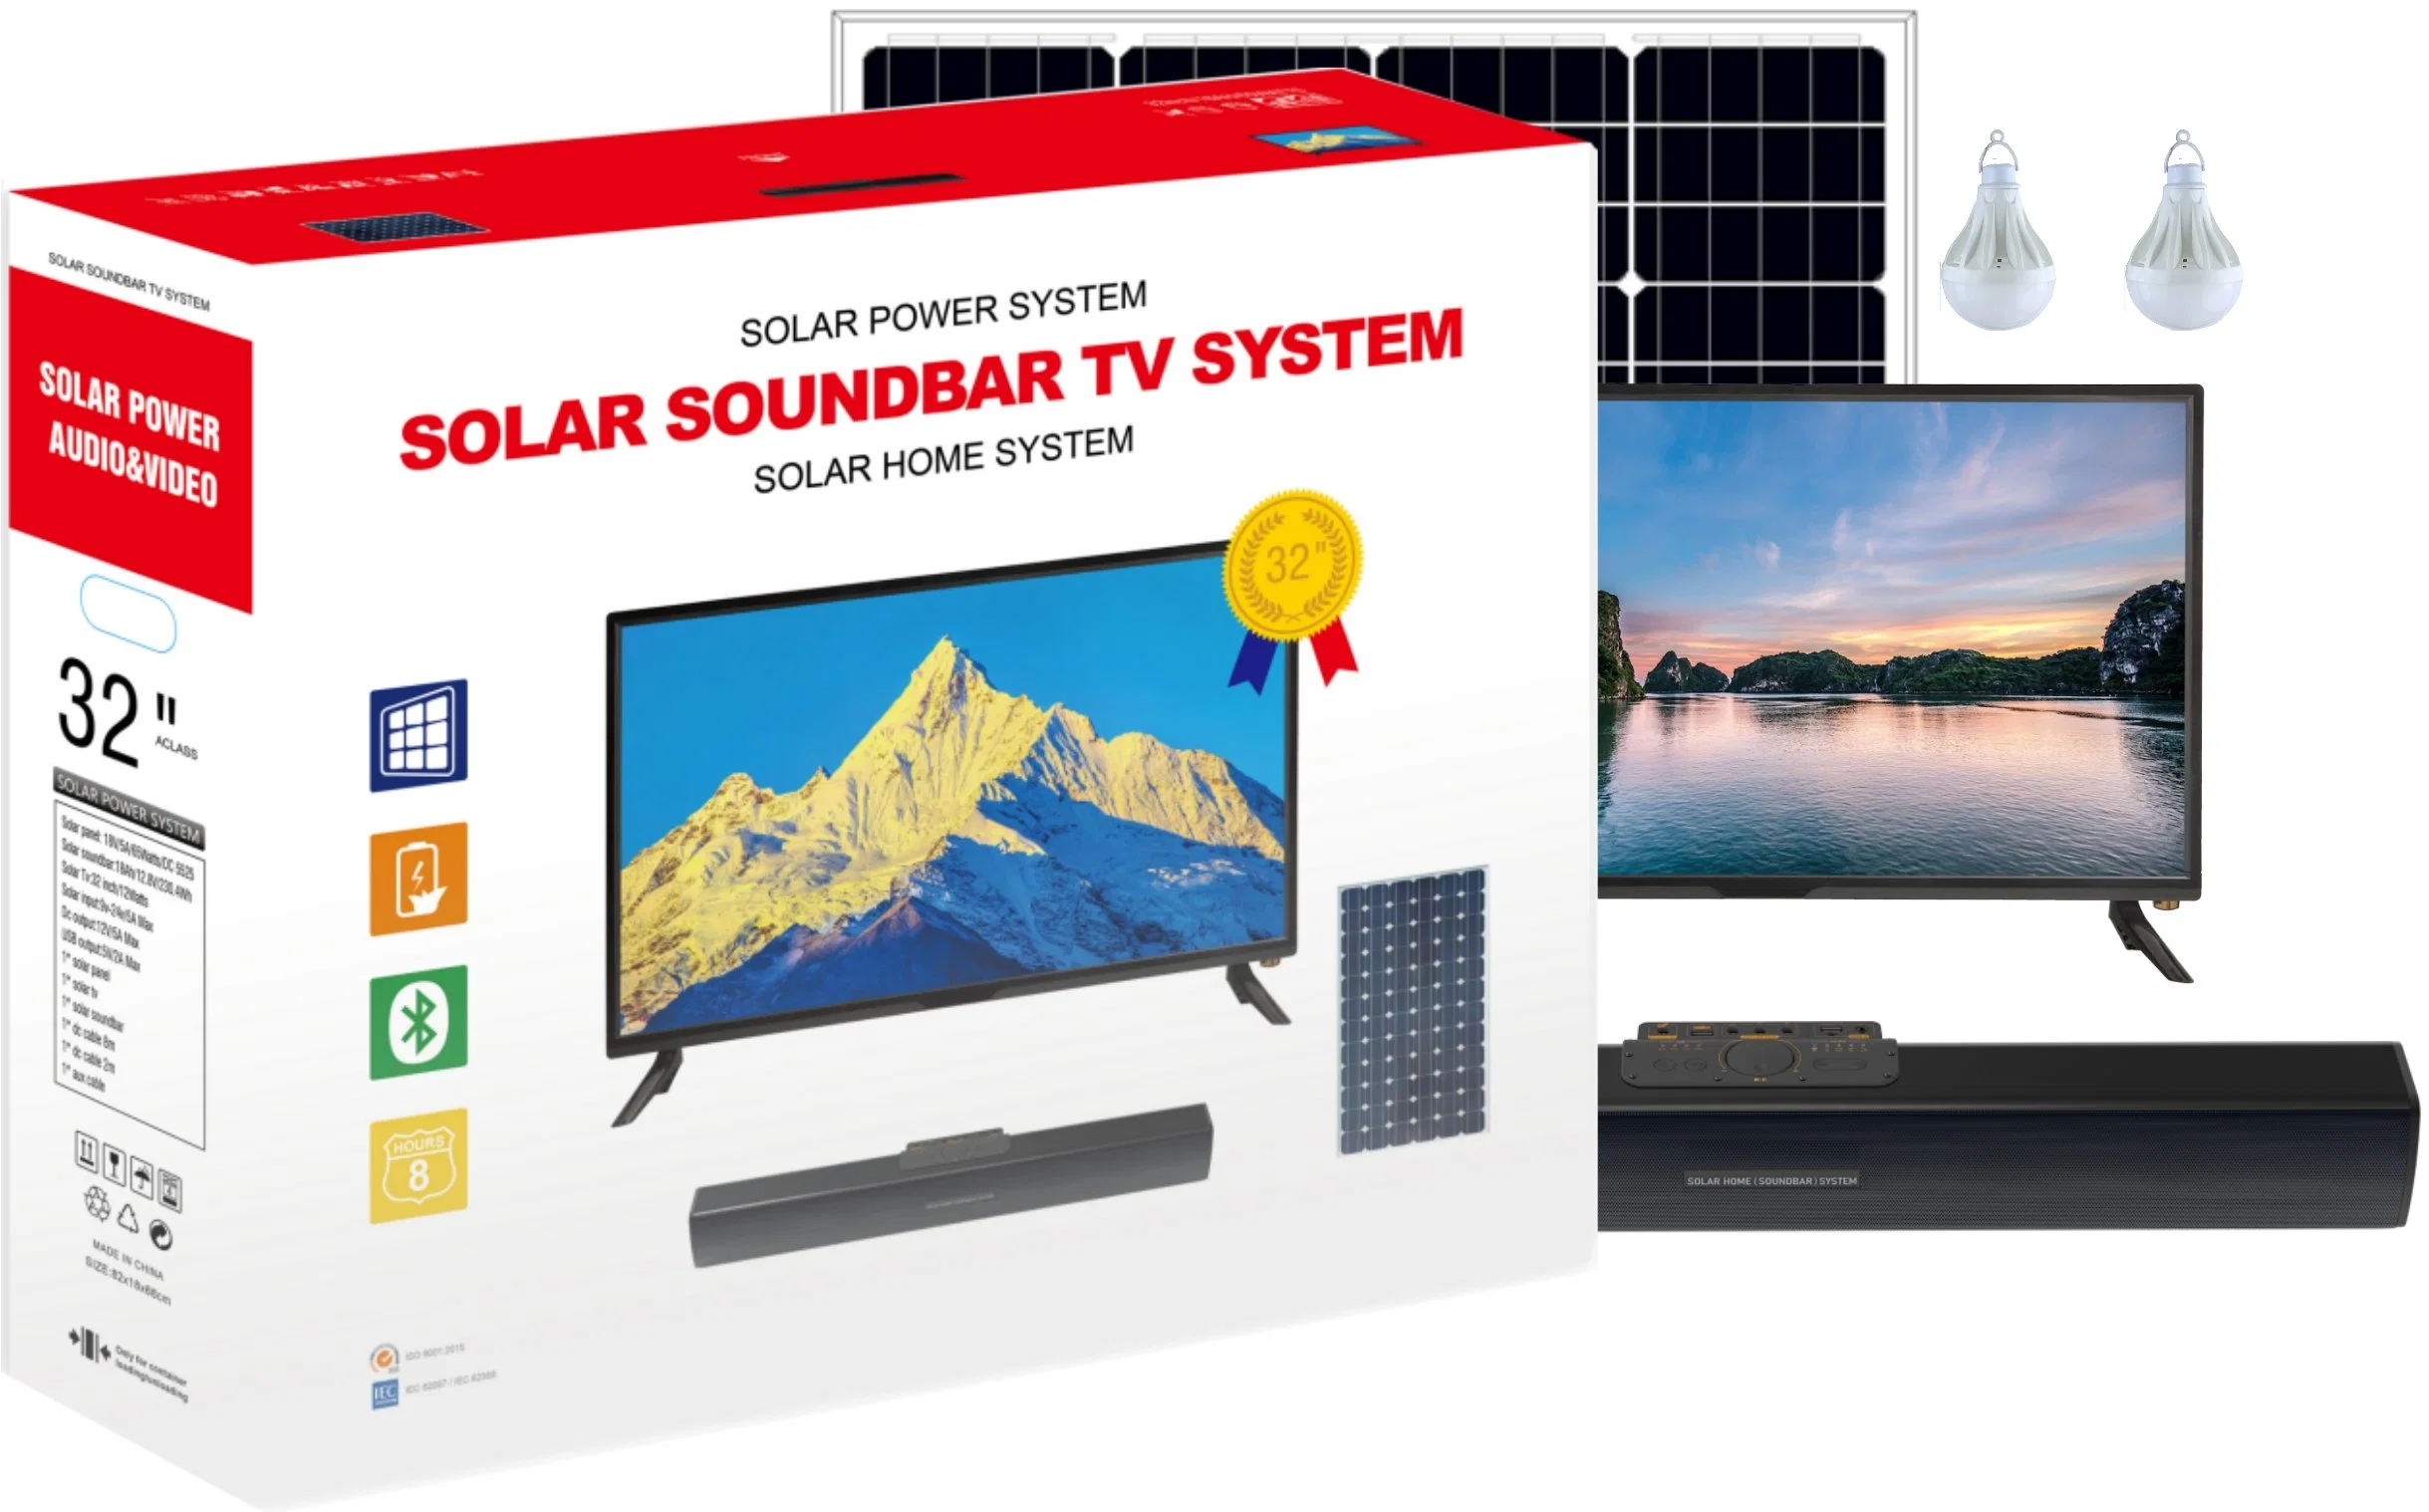 Factory Pcv Solar Home Power System Solar Sound-Bar TV System Multifonctions Sound-Bar Support Bluetooth, TF Card, FM Radio, USB, Aux Stockage Energy, Portable